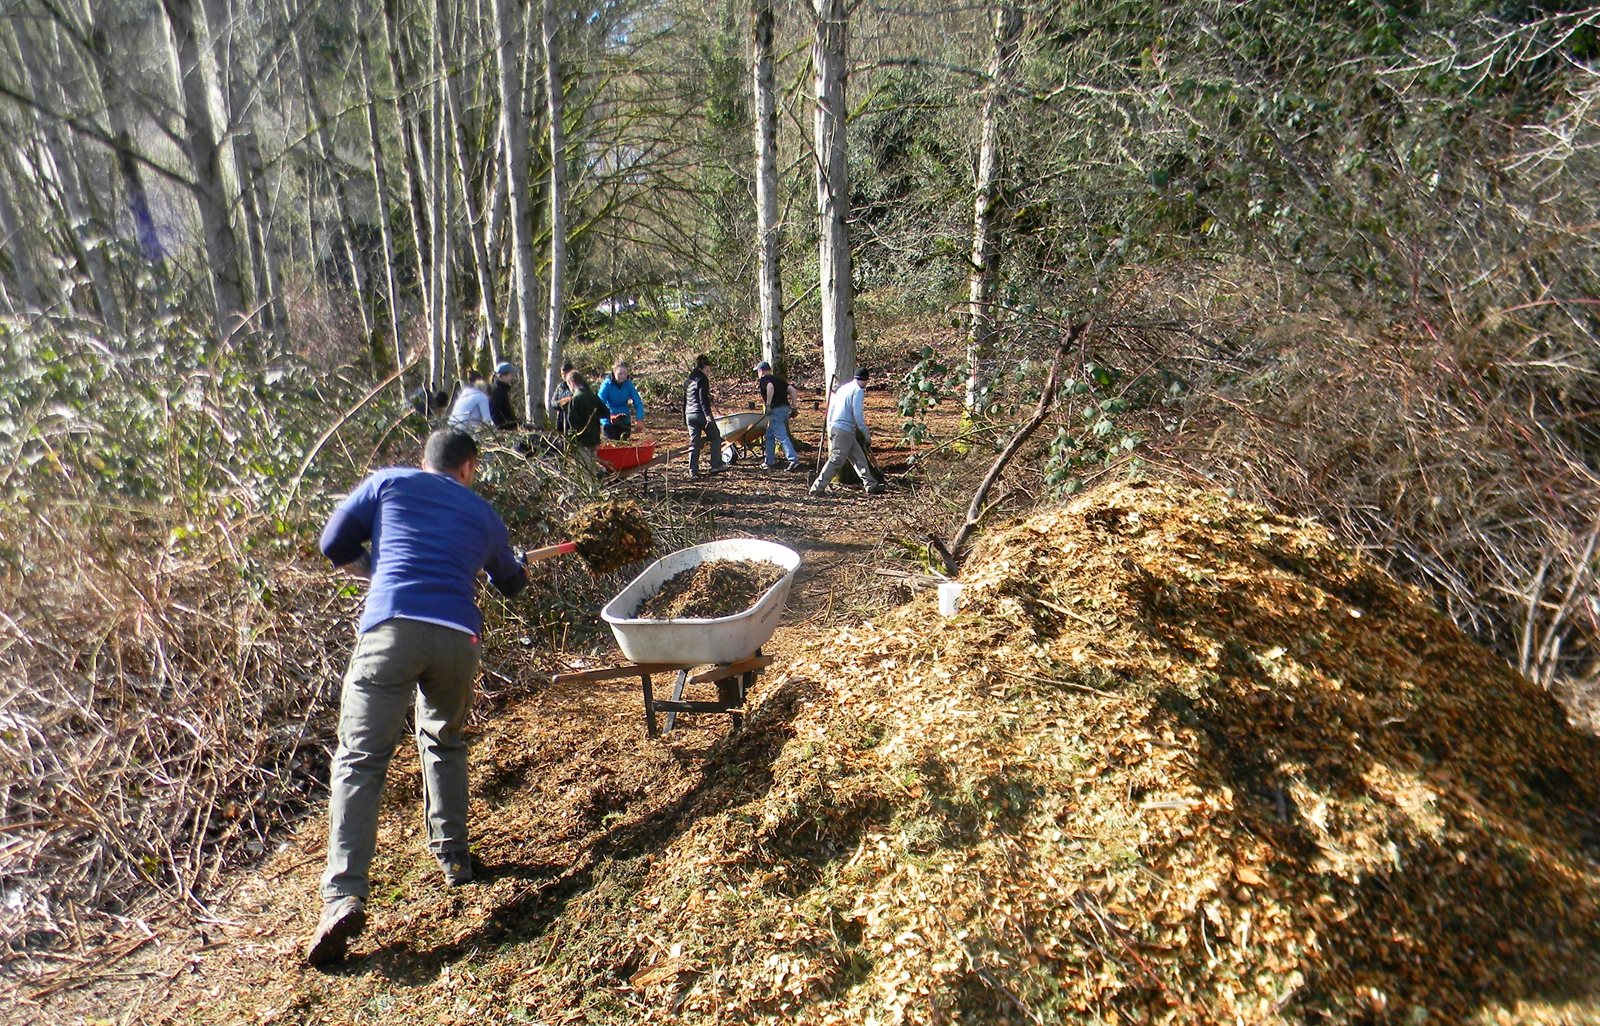 Forest cleanup work with wheelbarrow